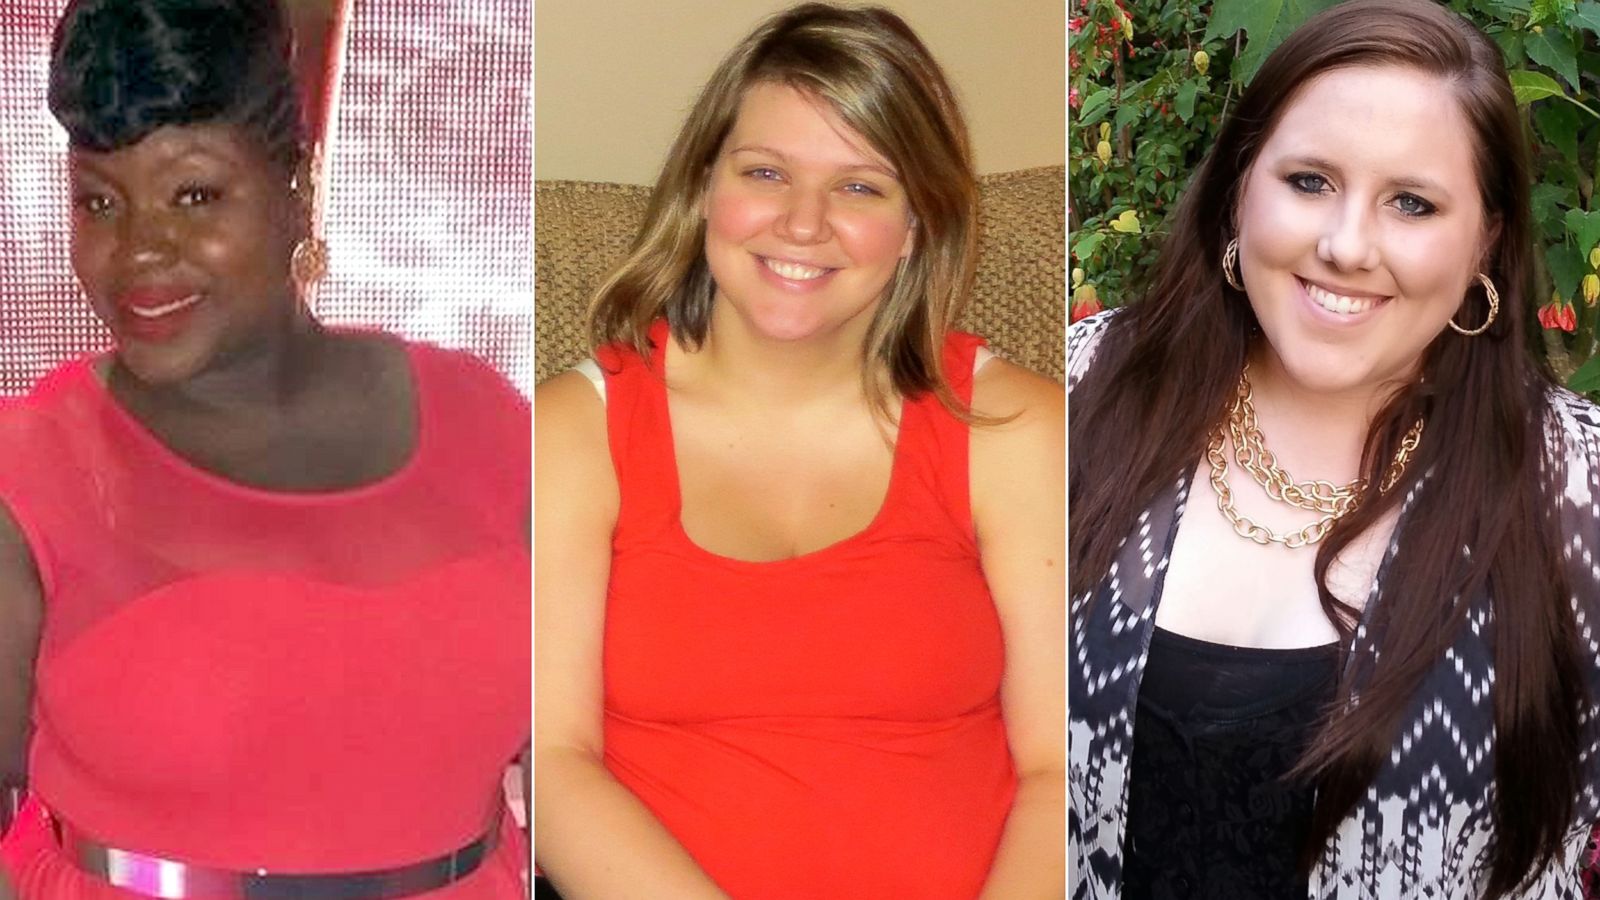 5 tips from a woman who lost more than 200 pounds - Good Morning America